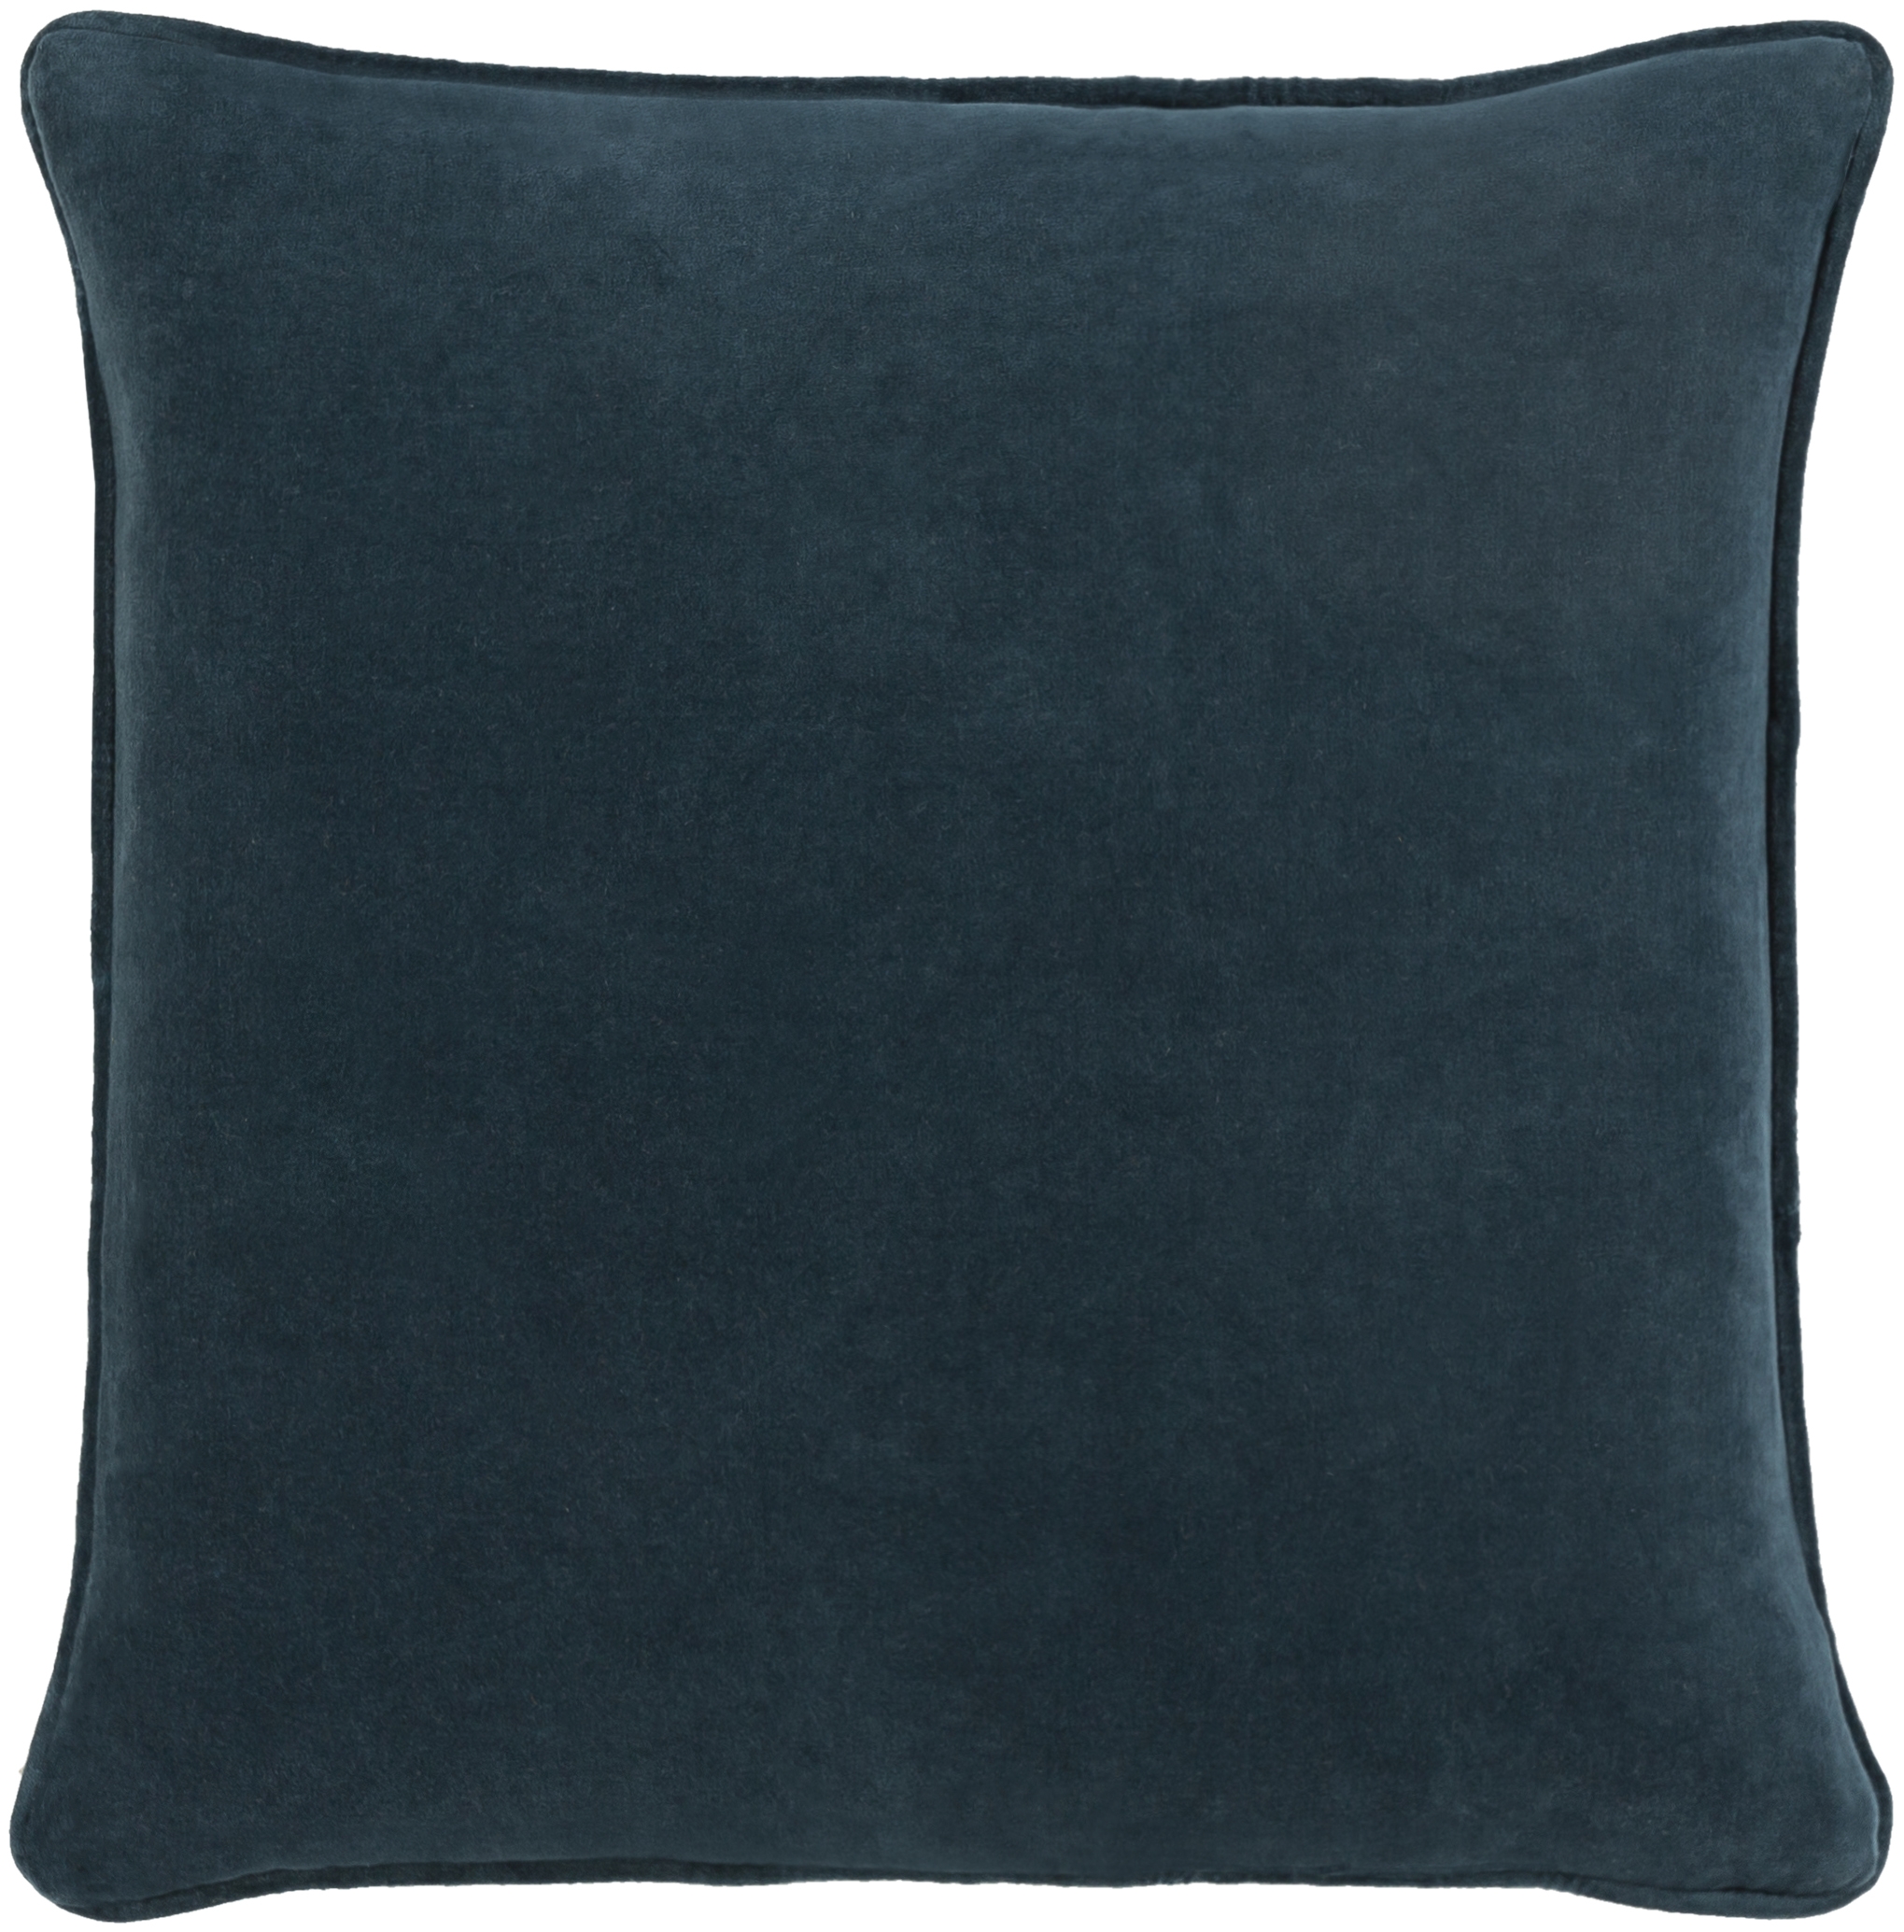 Safflower Throw Pillow, 20" x 20", with poly insert - Image 0